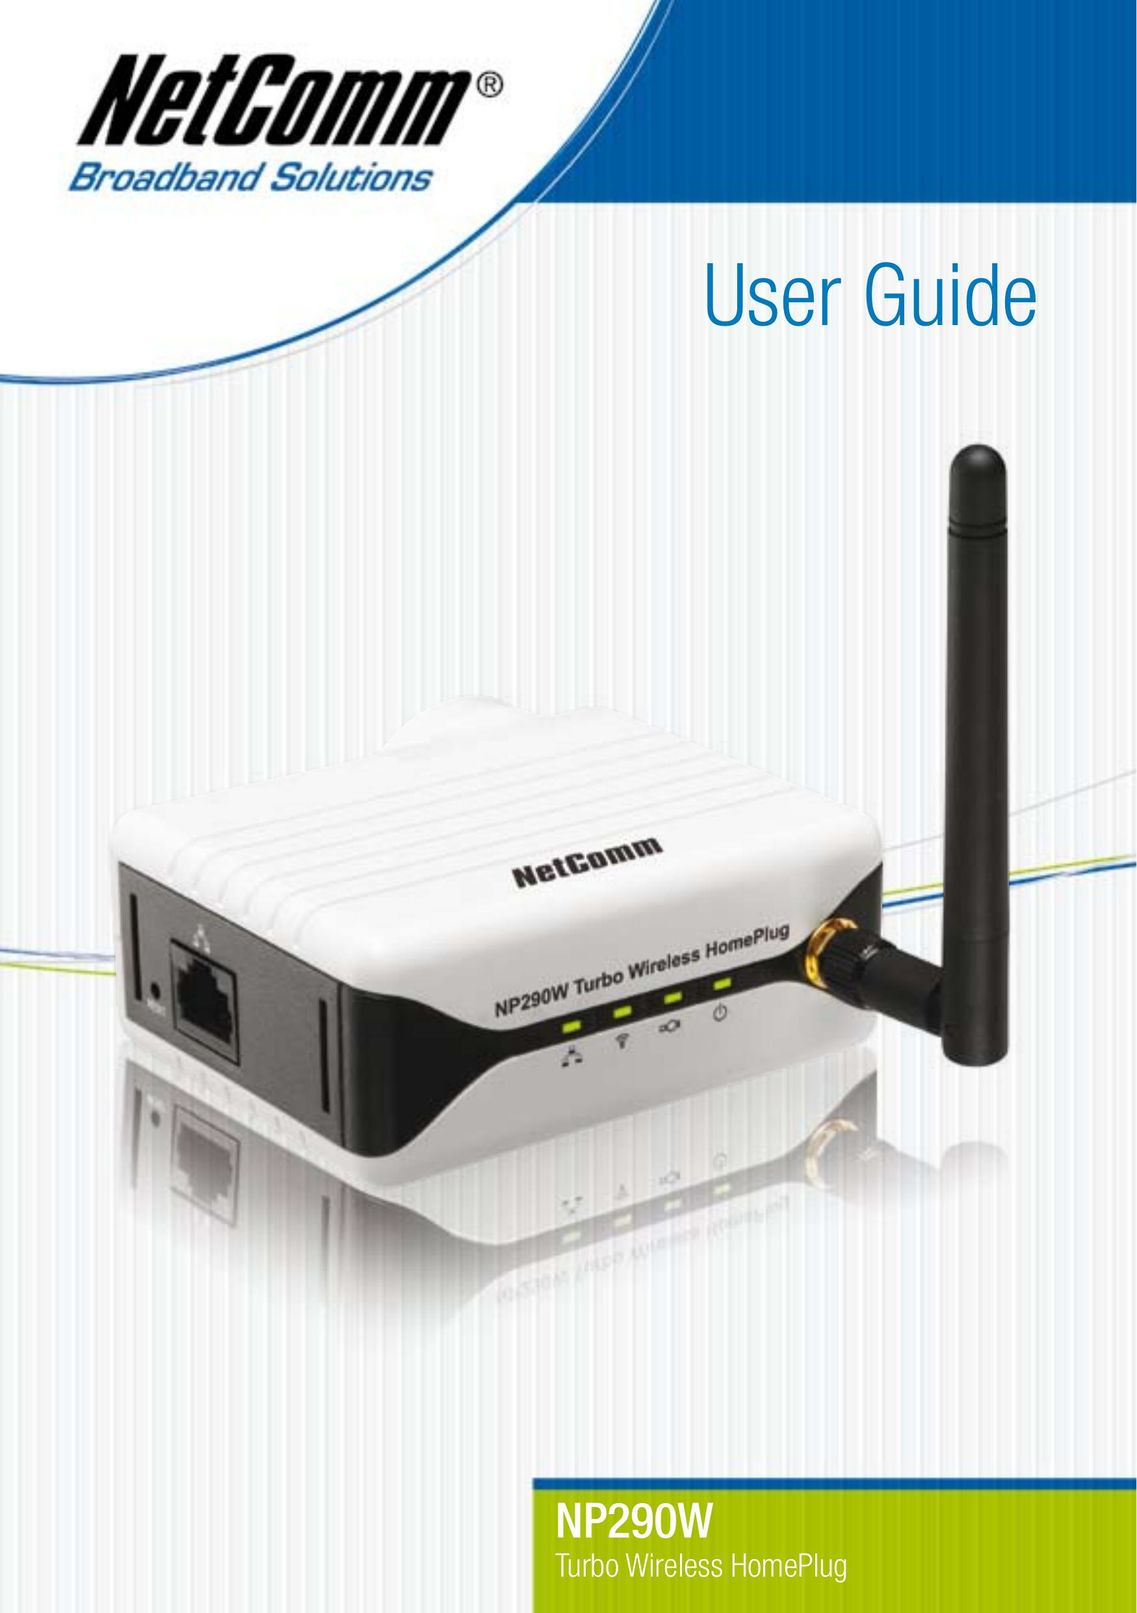 NetComm NP290W Network Router User Manual